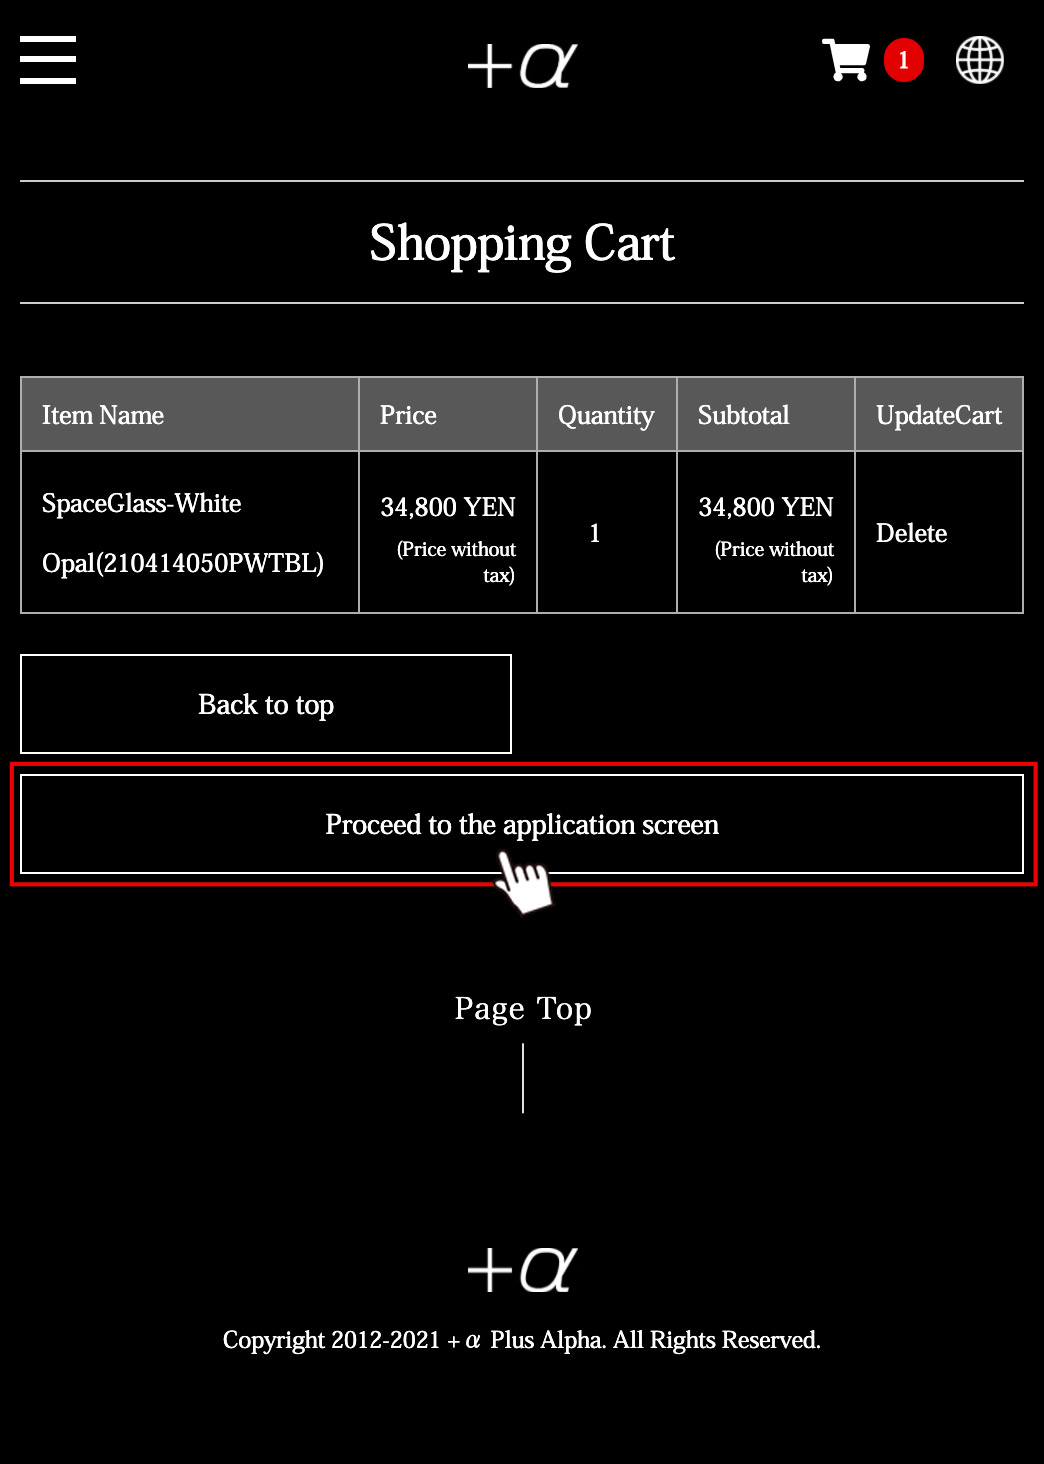 Check the contents of the cart